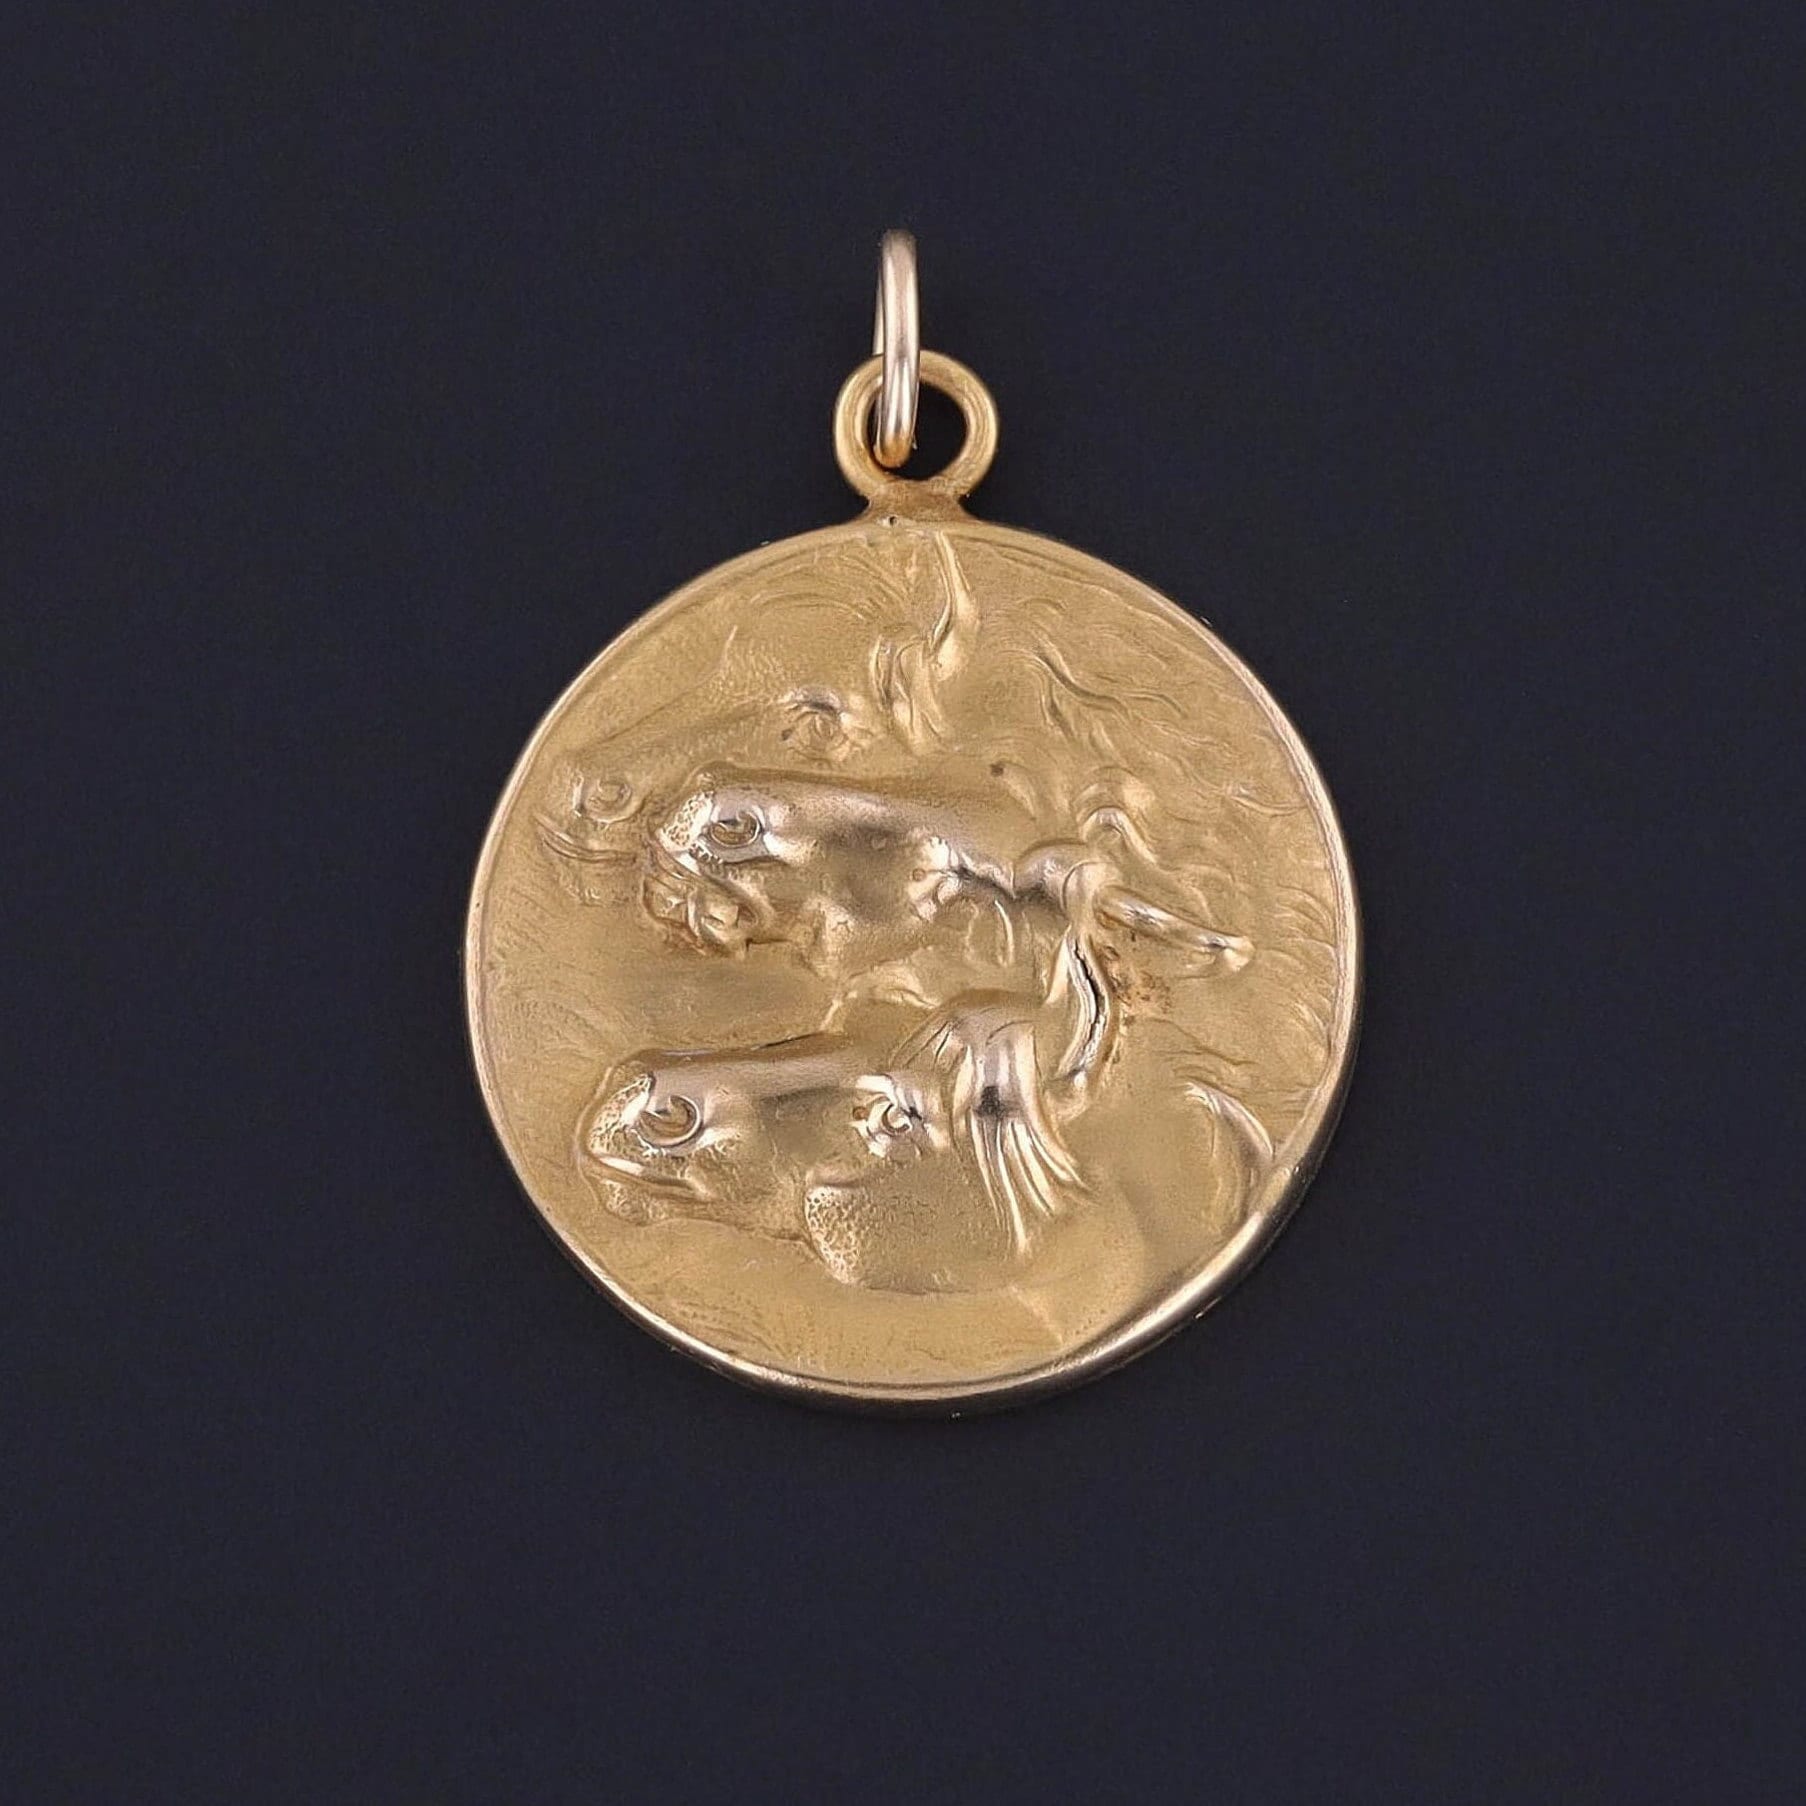 An antique pendant featuring three horse heads.